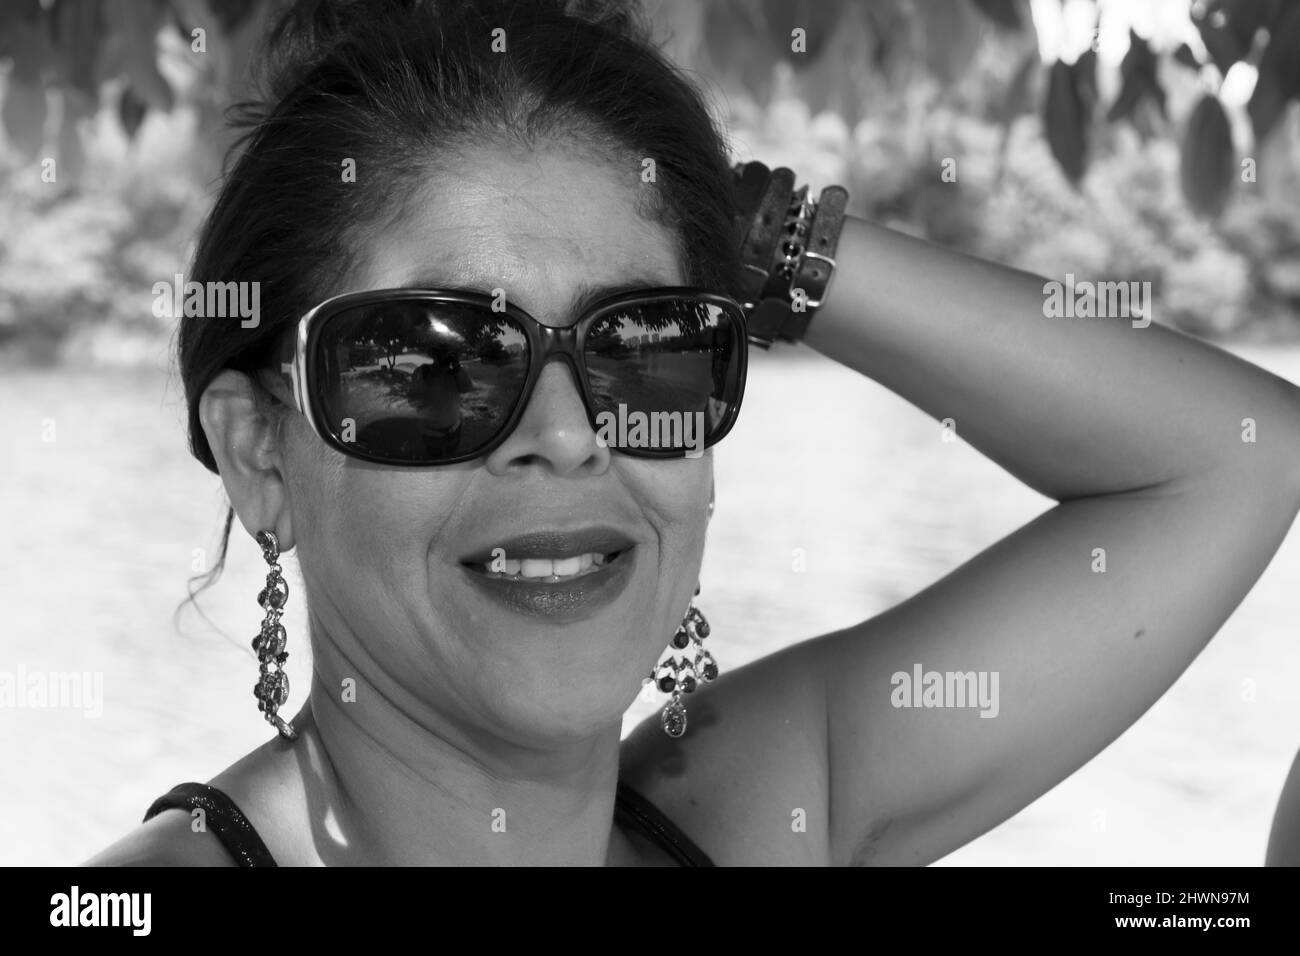 Close-up portrait of a woman wearing sunglasses against a river with trees in the background. Salvador, Bahia, Brazil. Stock Photo